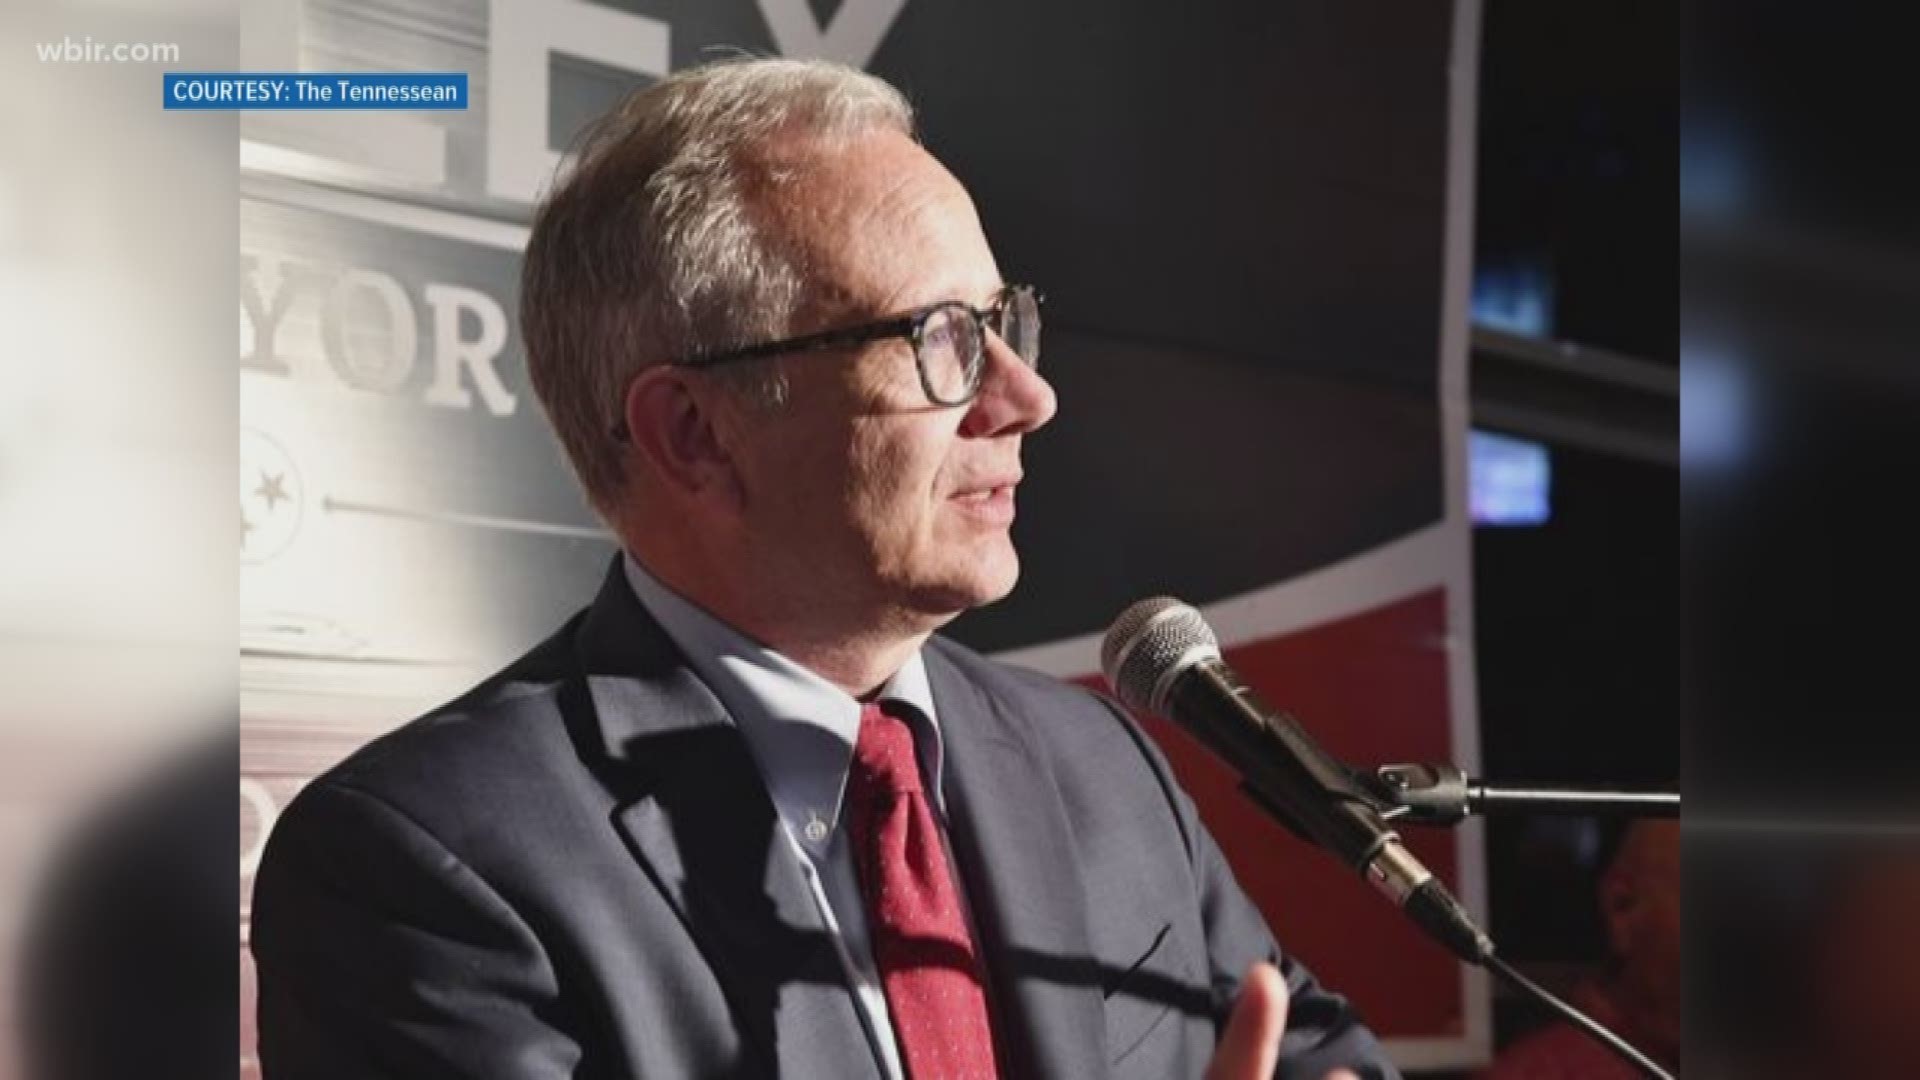 Nashville's acting mayor David Briley, a progressive Democrat who took over in the wake former mayor Megan Berry's resignation, has been elected as the official mayor of the Music City.